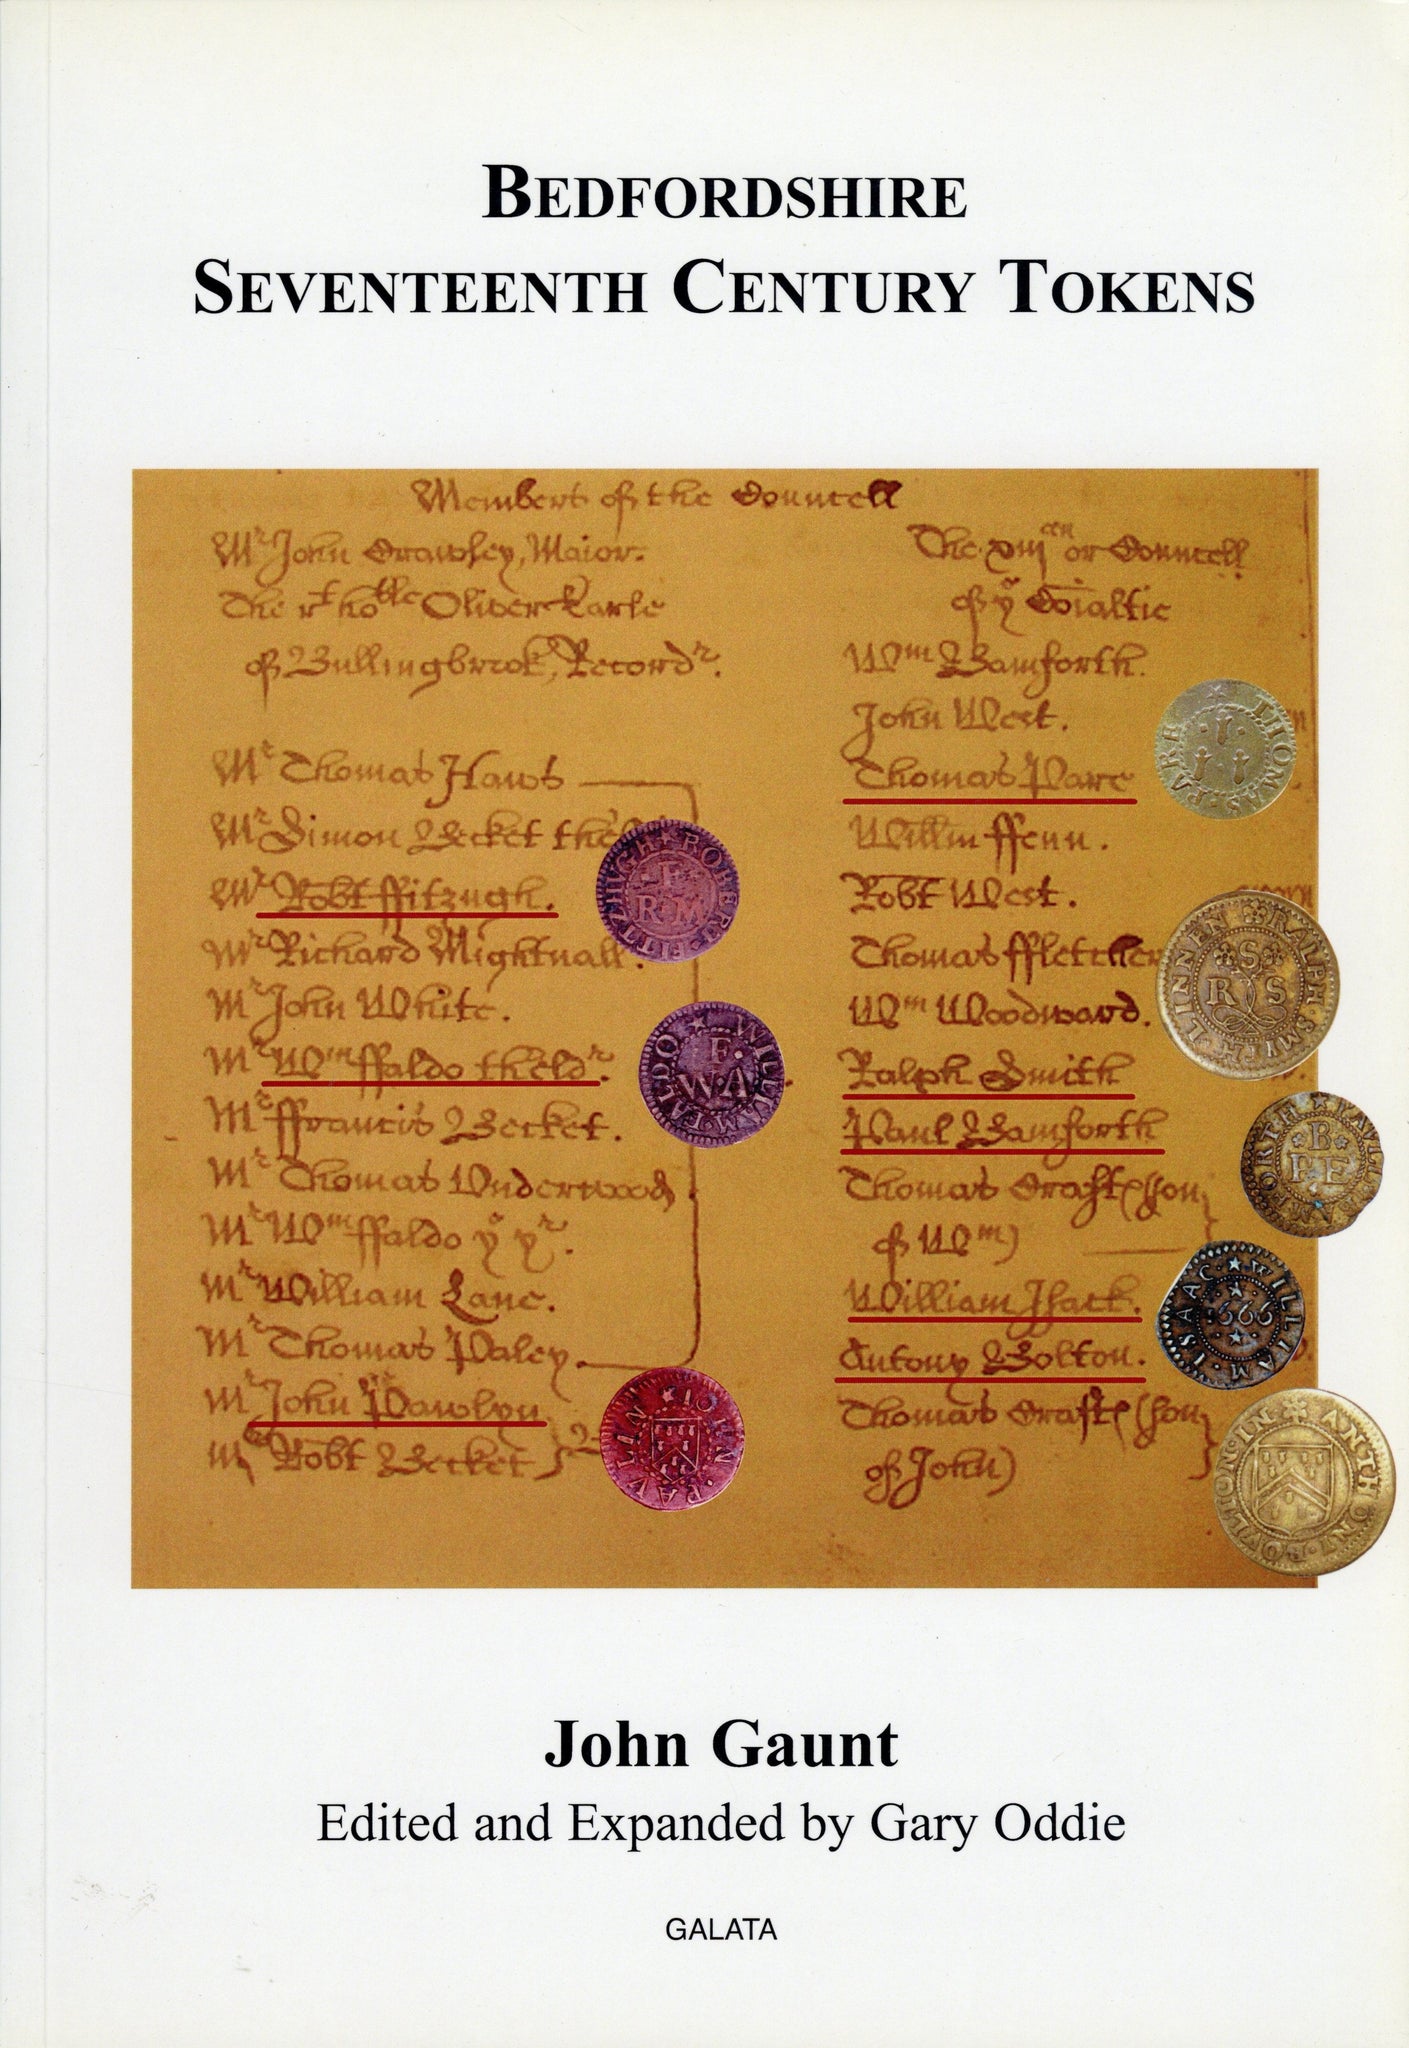 Bedfordshire Seventeenth Century Tokens by Gaunt, J. (Edited and Expanded by Oddie, G.)